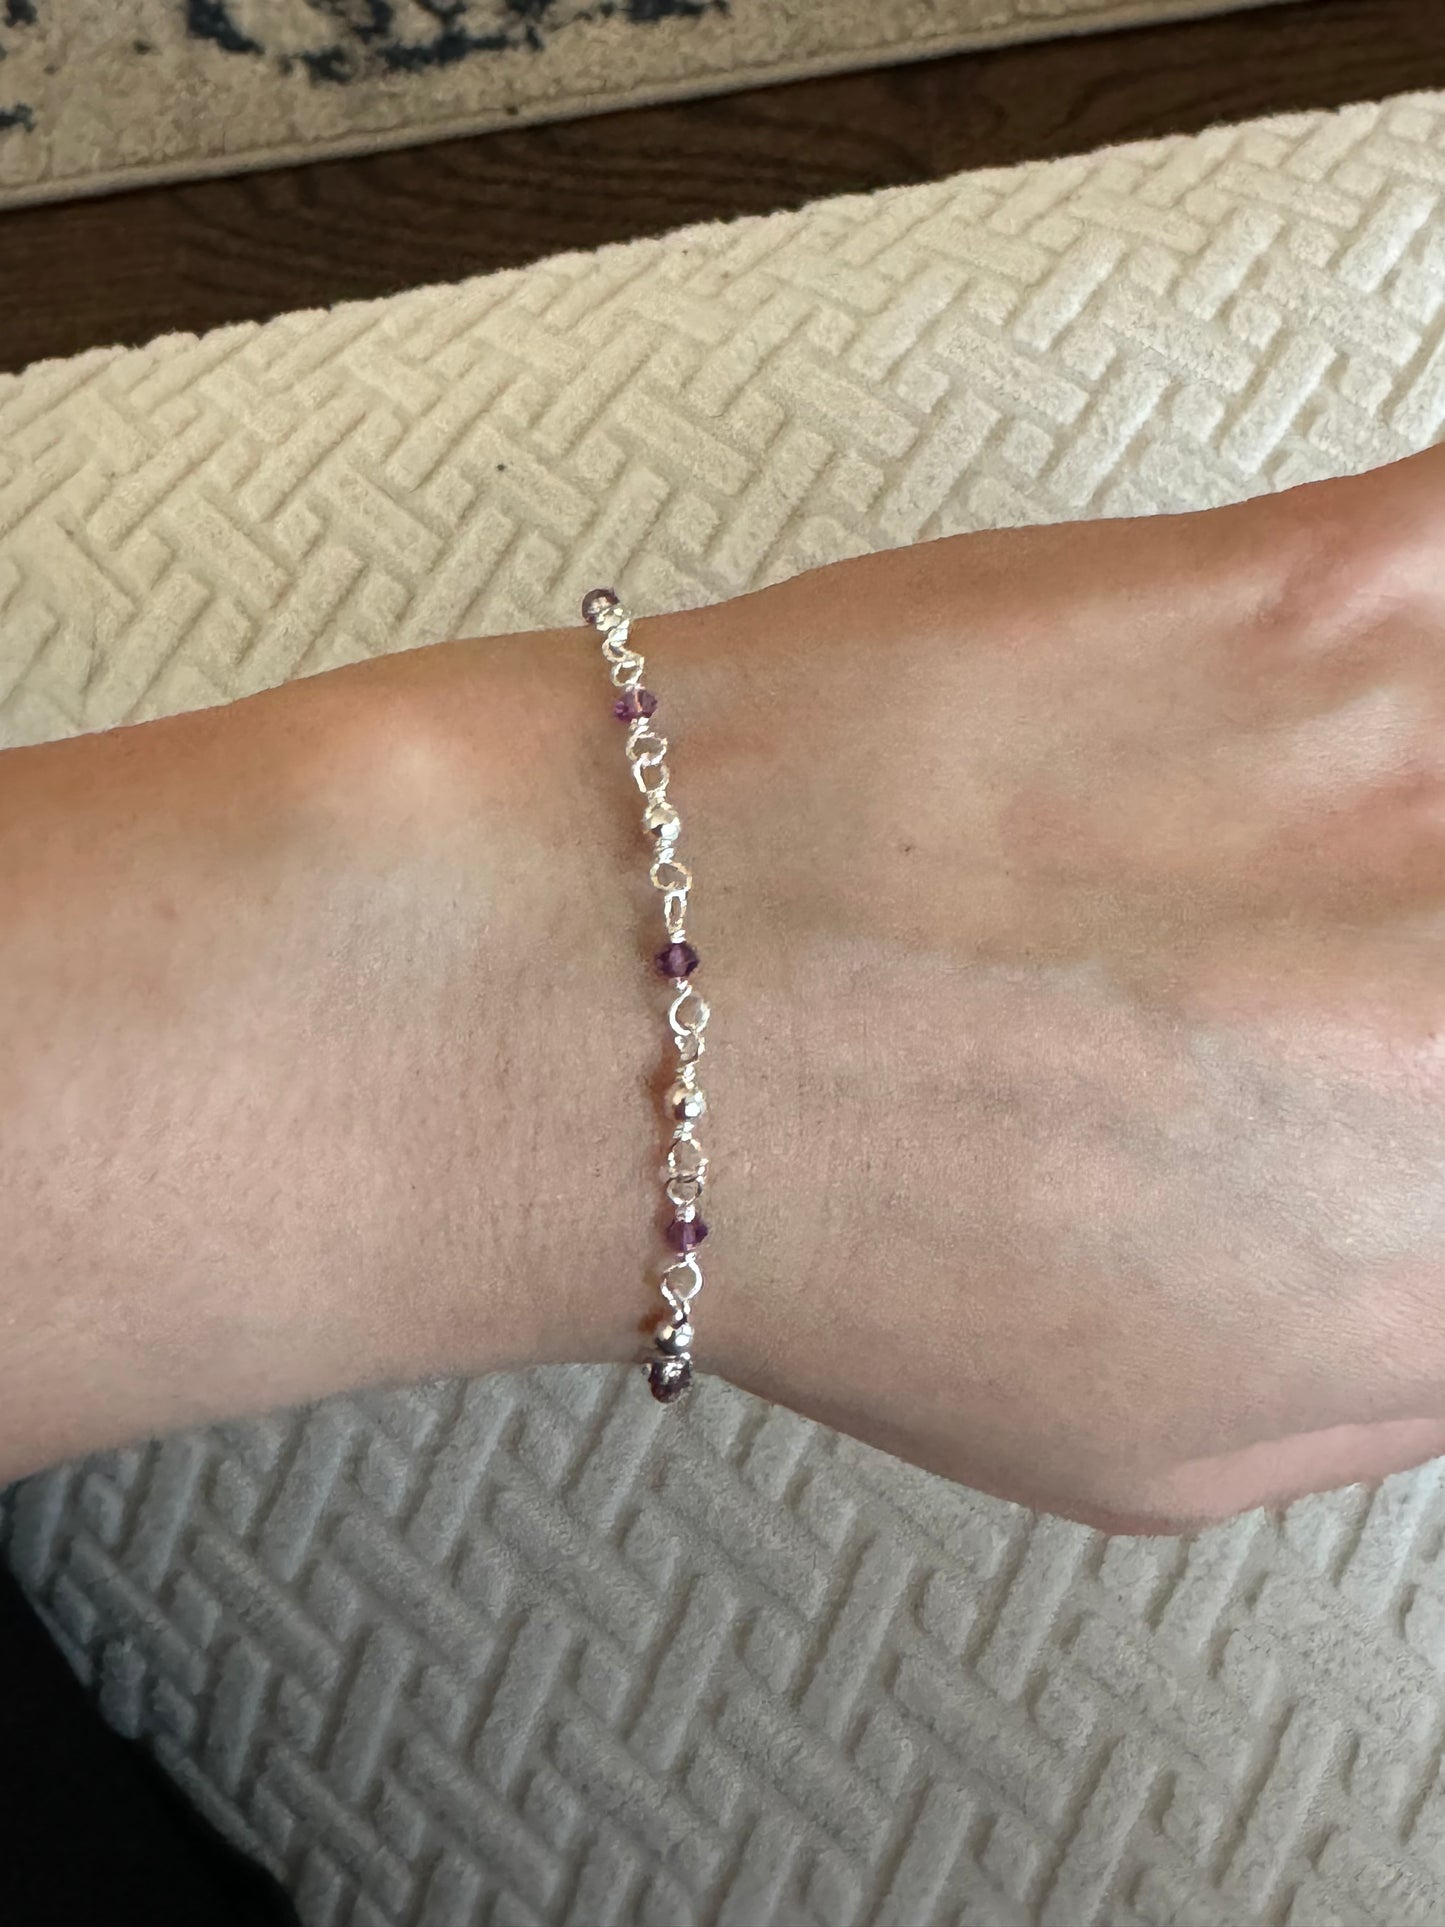 10. Silver bracelet with beads 7.5 inches $18 inches